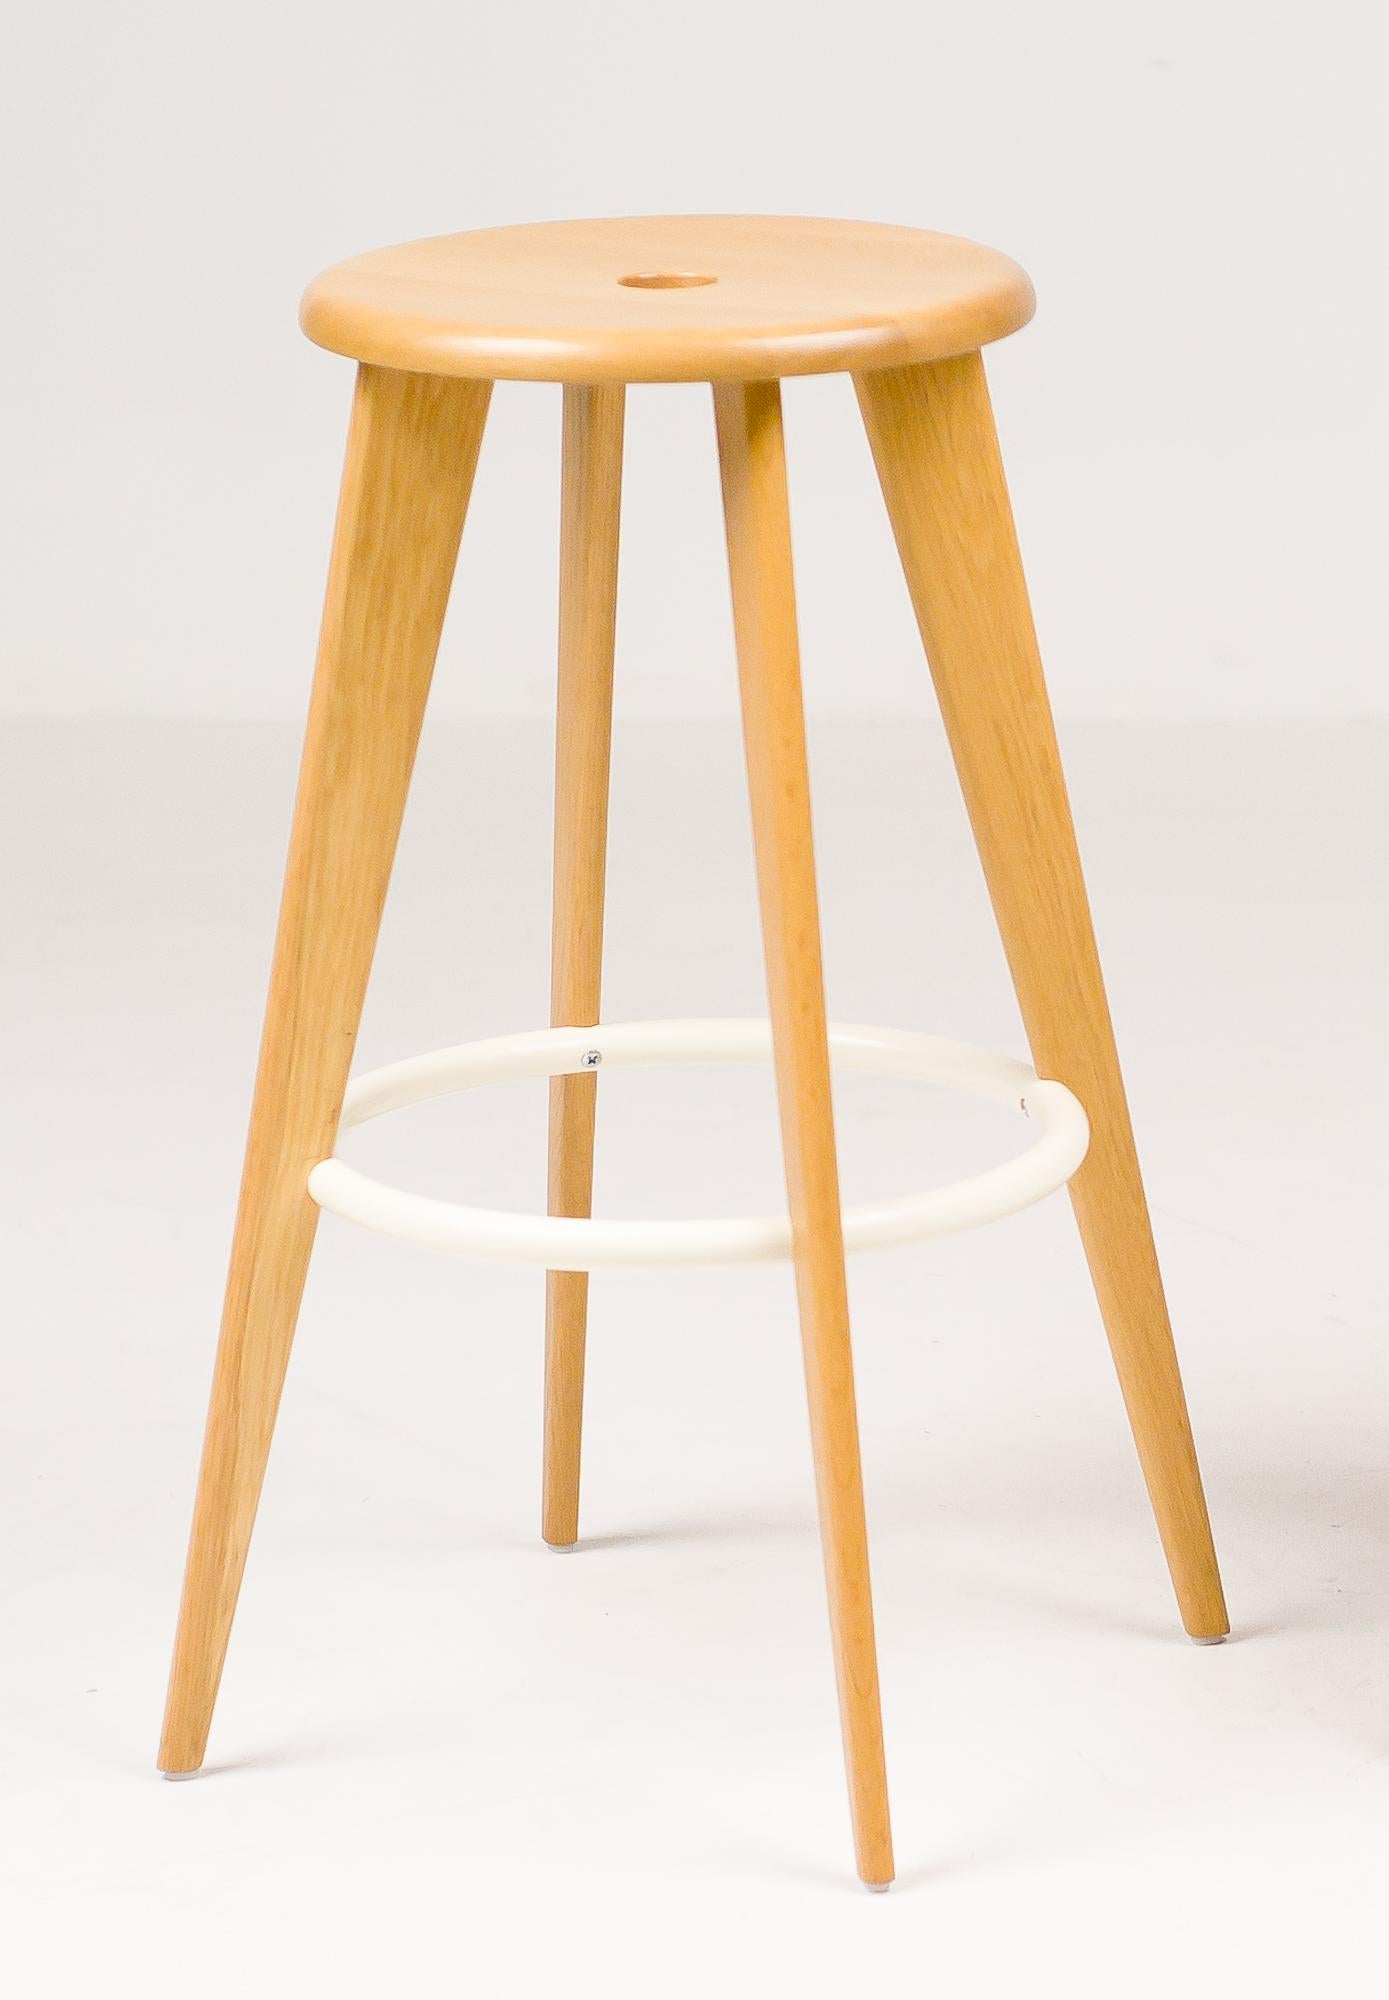 The Tabouret Haut bar stool designed by Jean Prouvé and made by Vitra is based on the basic shape of the Classic bar stool. Crafted from oak conform the Classic Tabouret Haut. Natural oak, off-white enameled steel ring.
Marked with label, priced